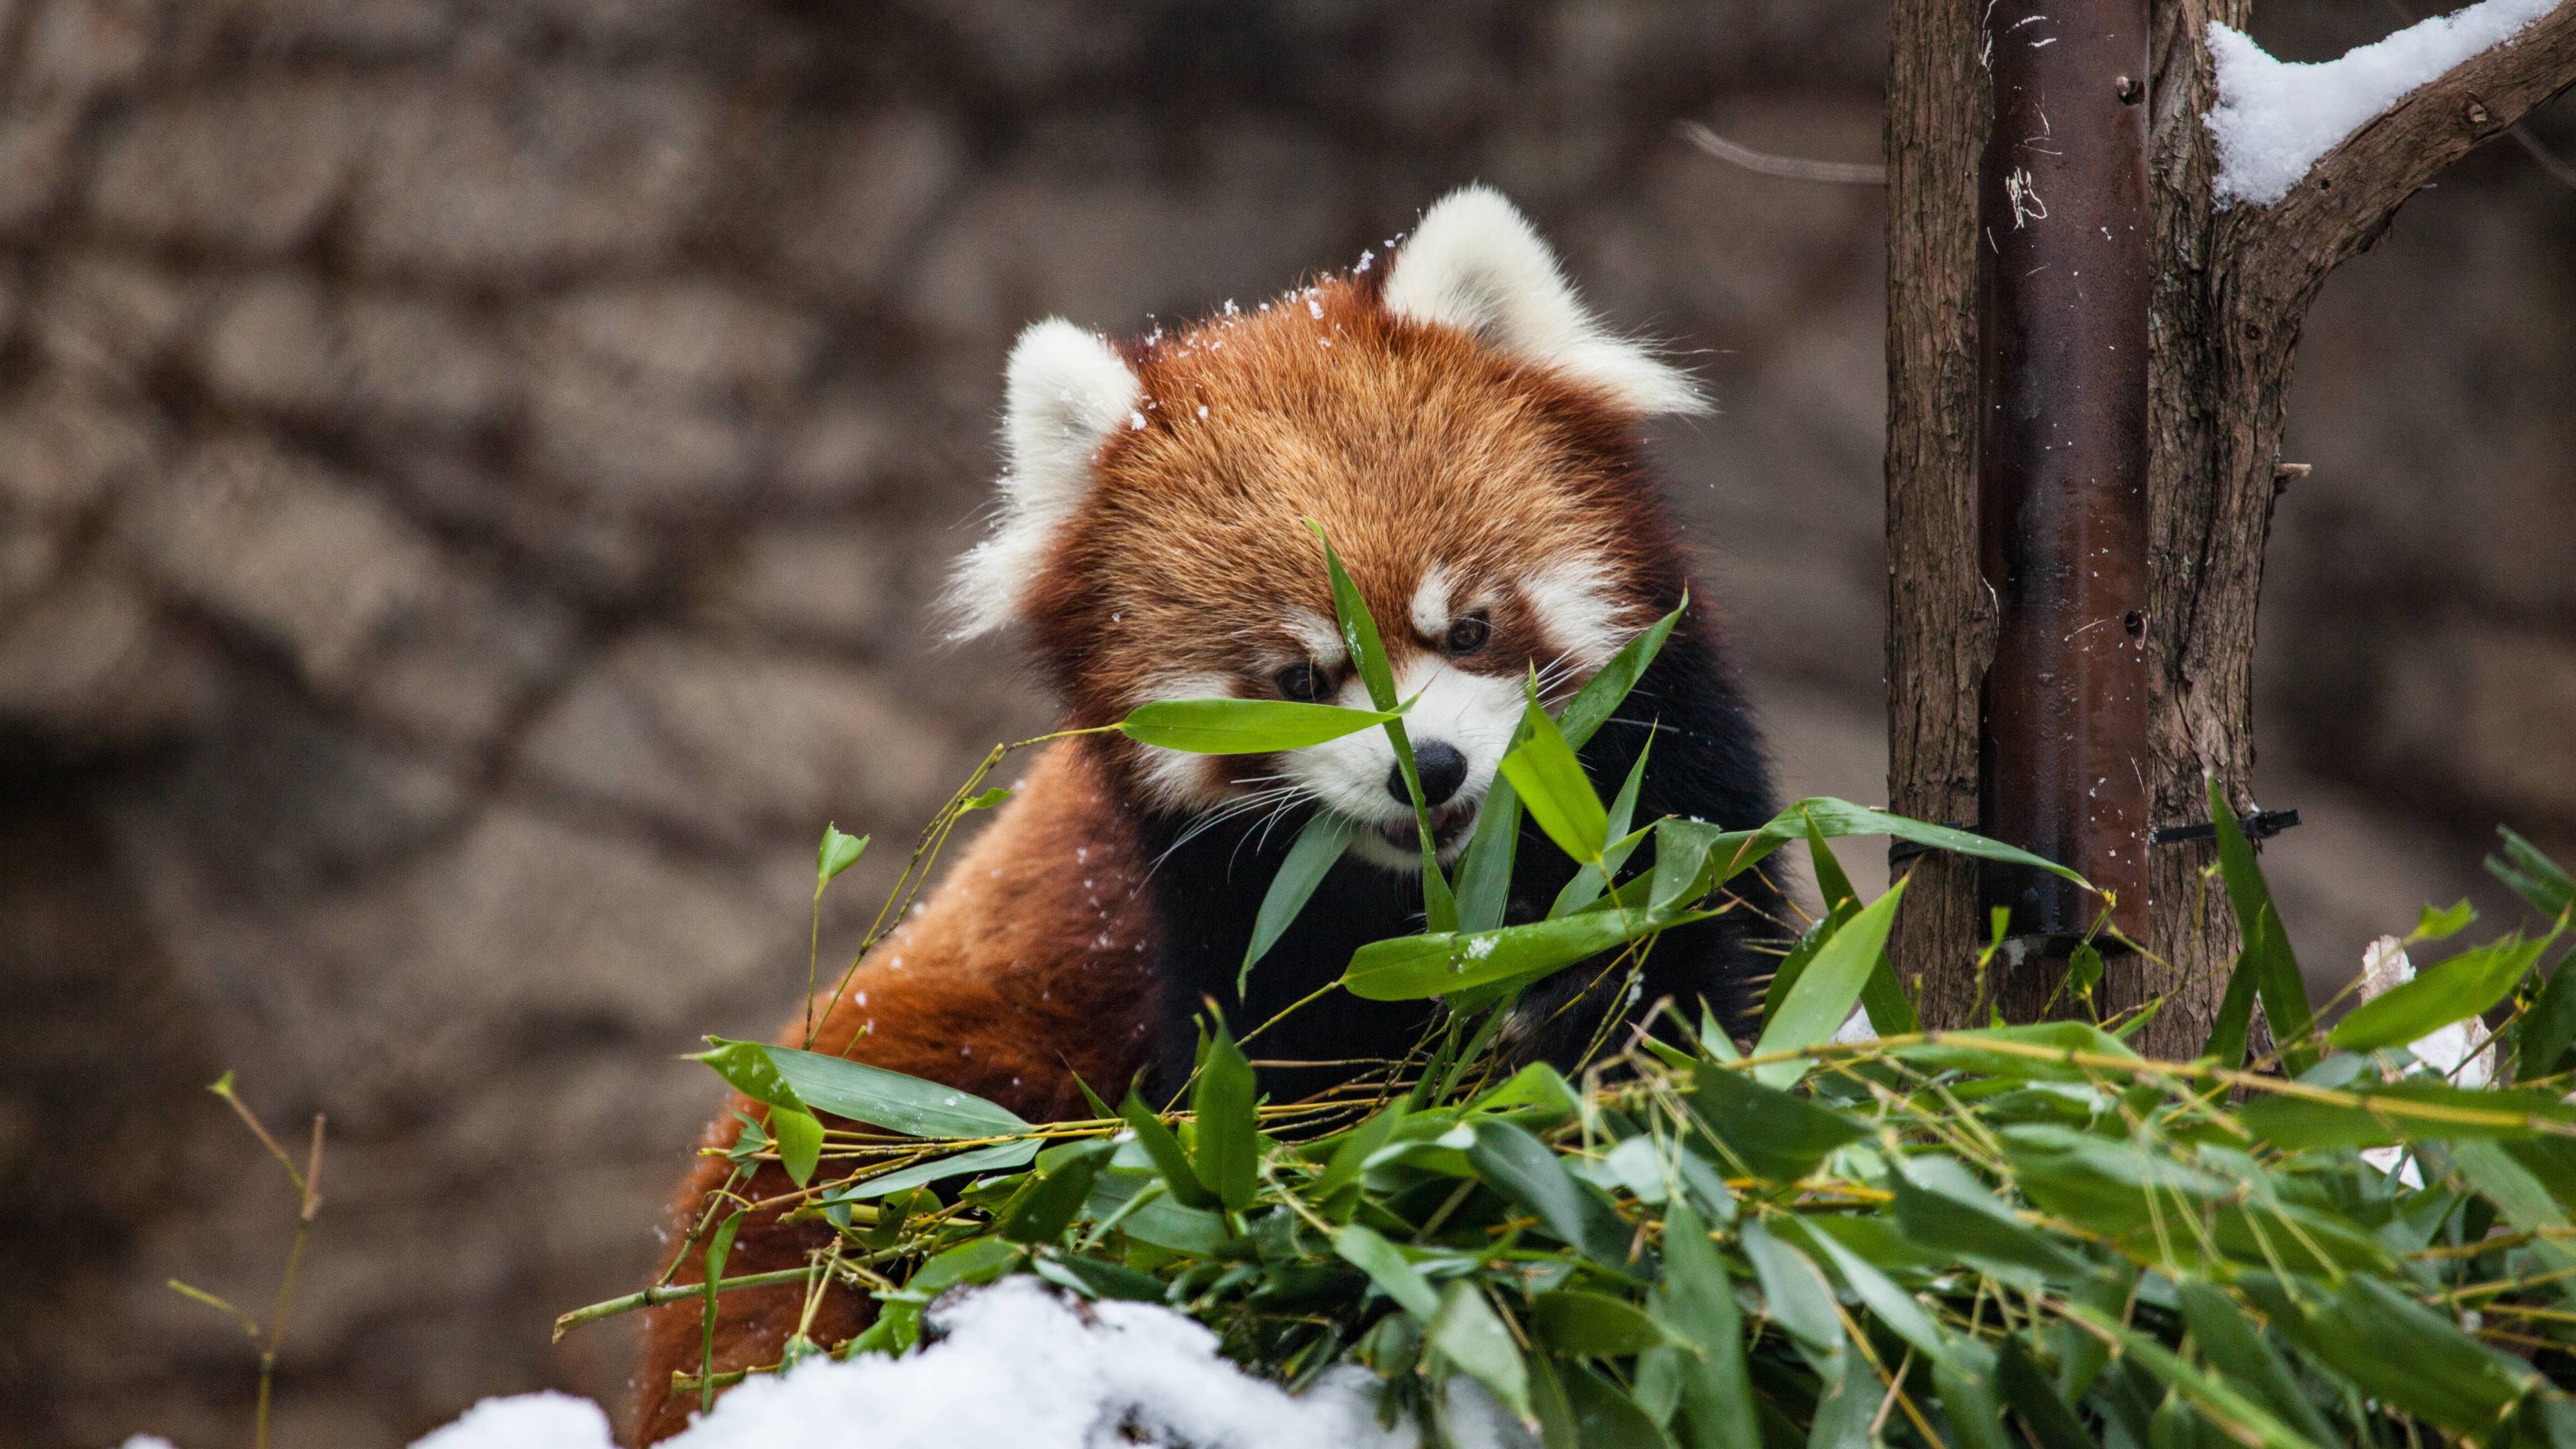 Red Panda Wallpapers 66 pictures